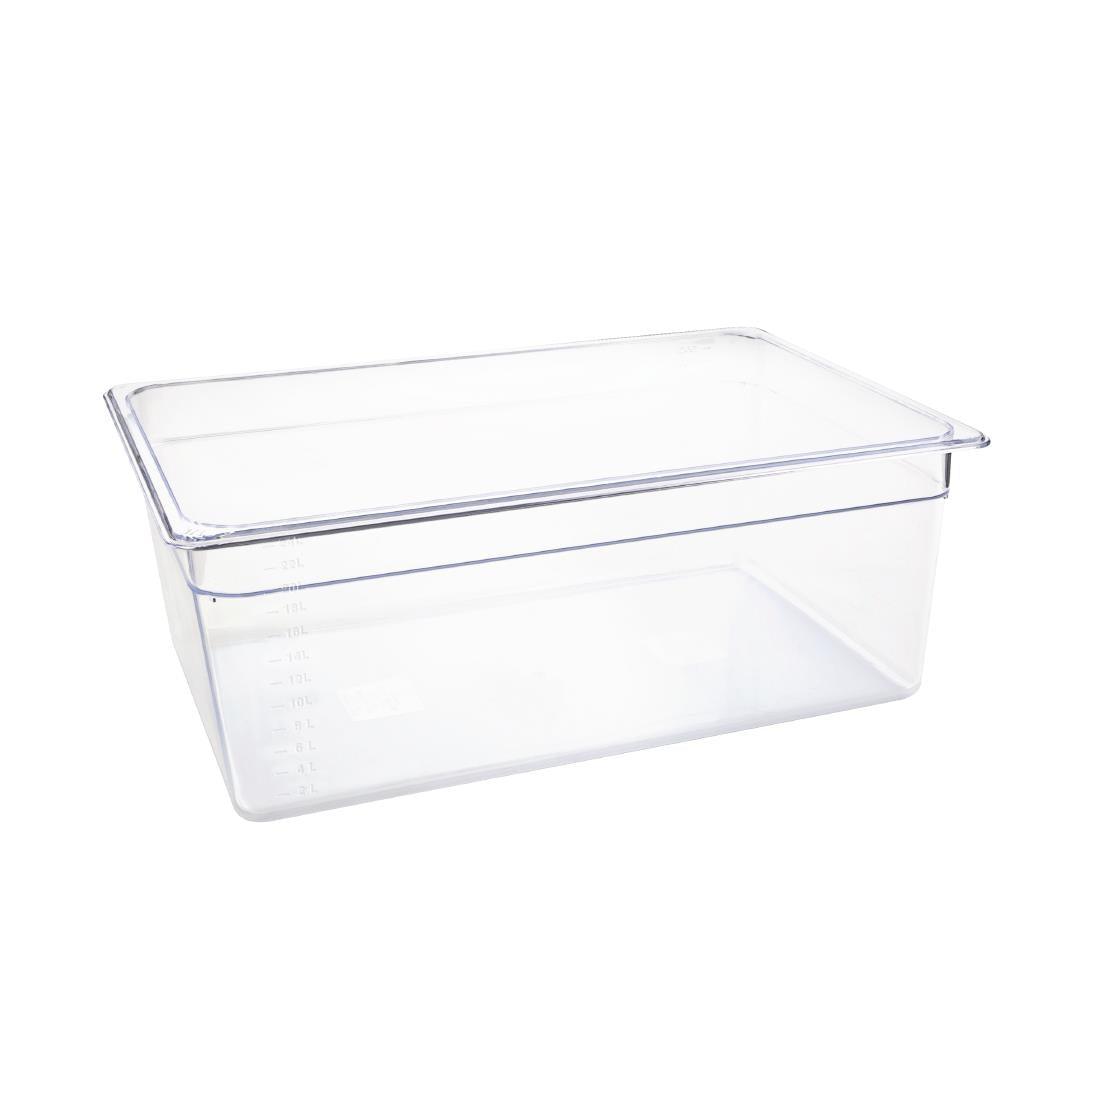 Vogue Clear Polycarbonate 1/1 Gastronorm Tray 200mm - HospoStore